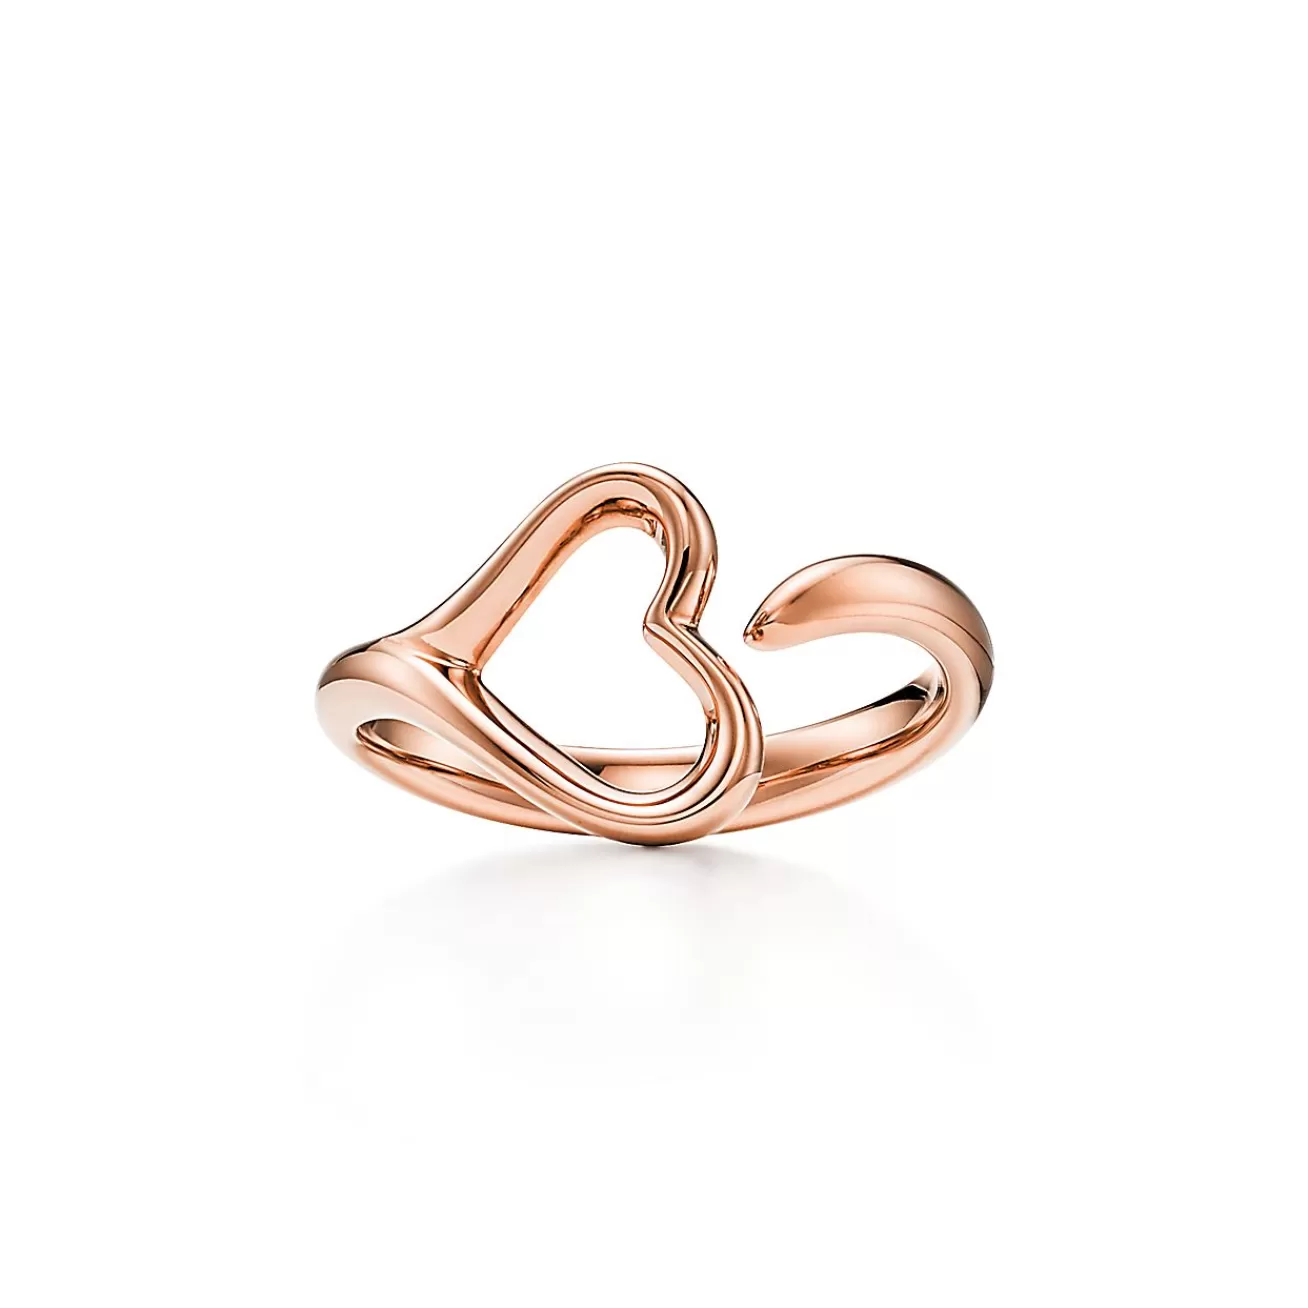 Tiffany & Co. Elsa Peretti® Open Heart ring in 18k rose gold, small. | ^ Rings | Rose Gold Jewelry